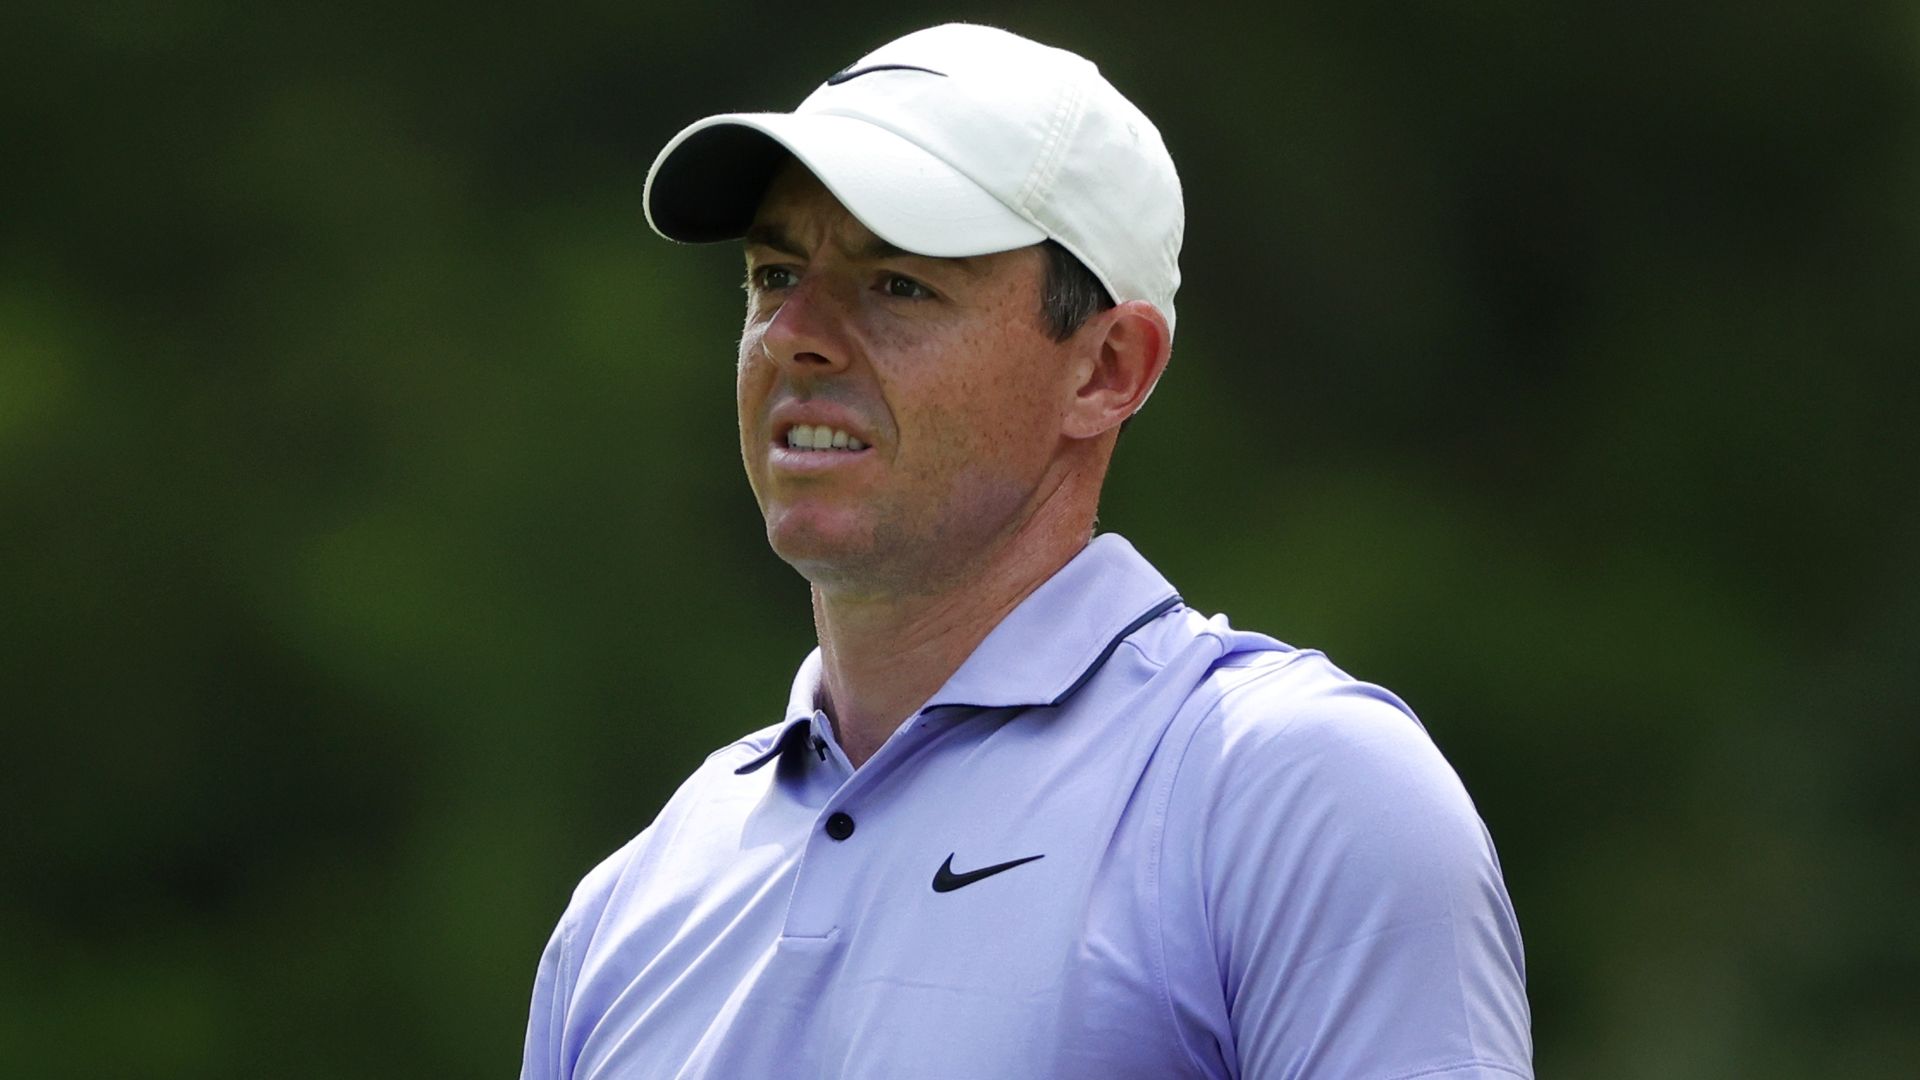 McIlroy eight strokes off pace